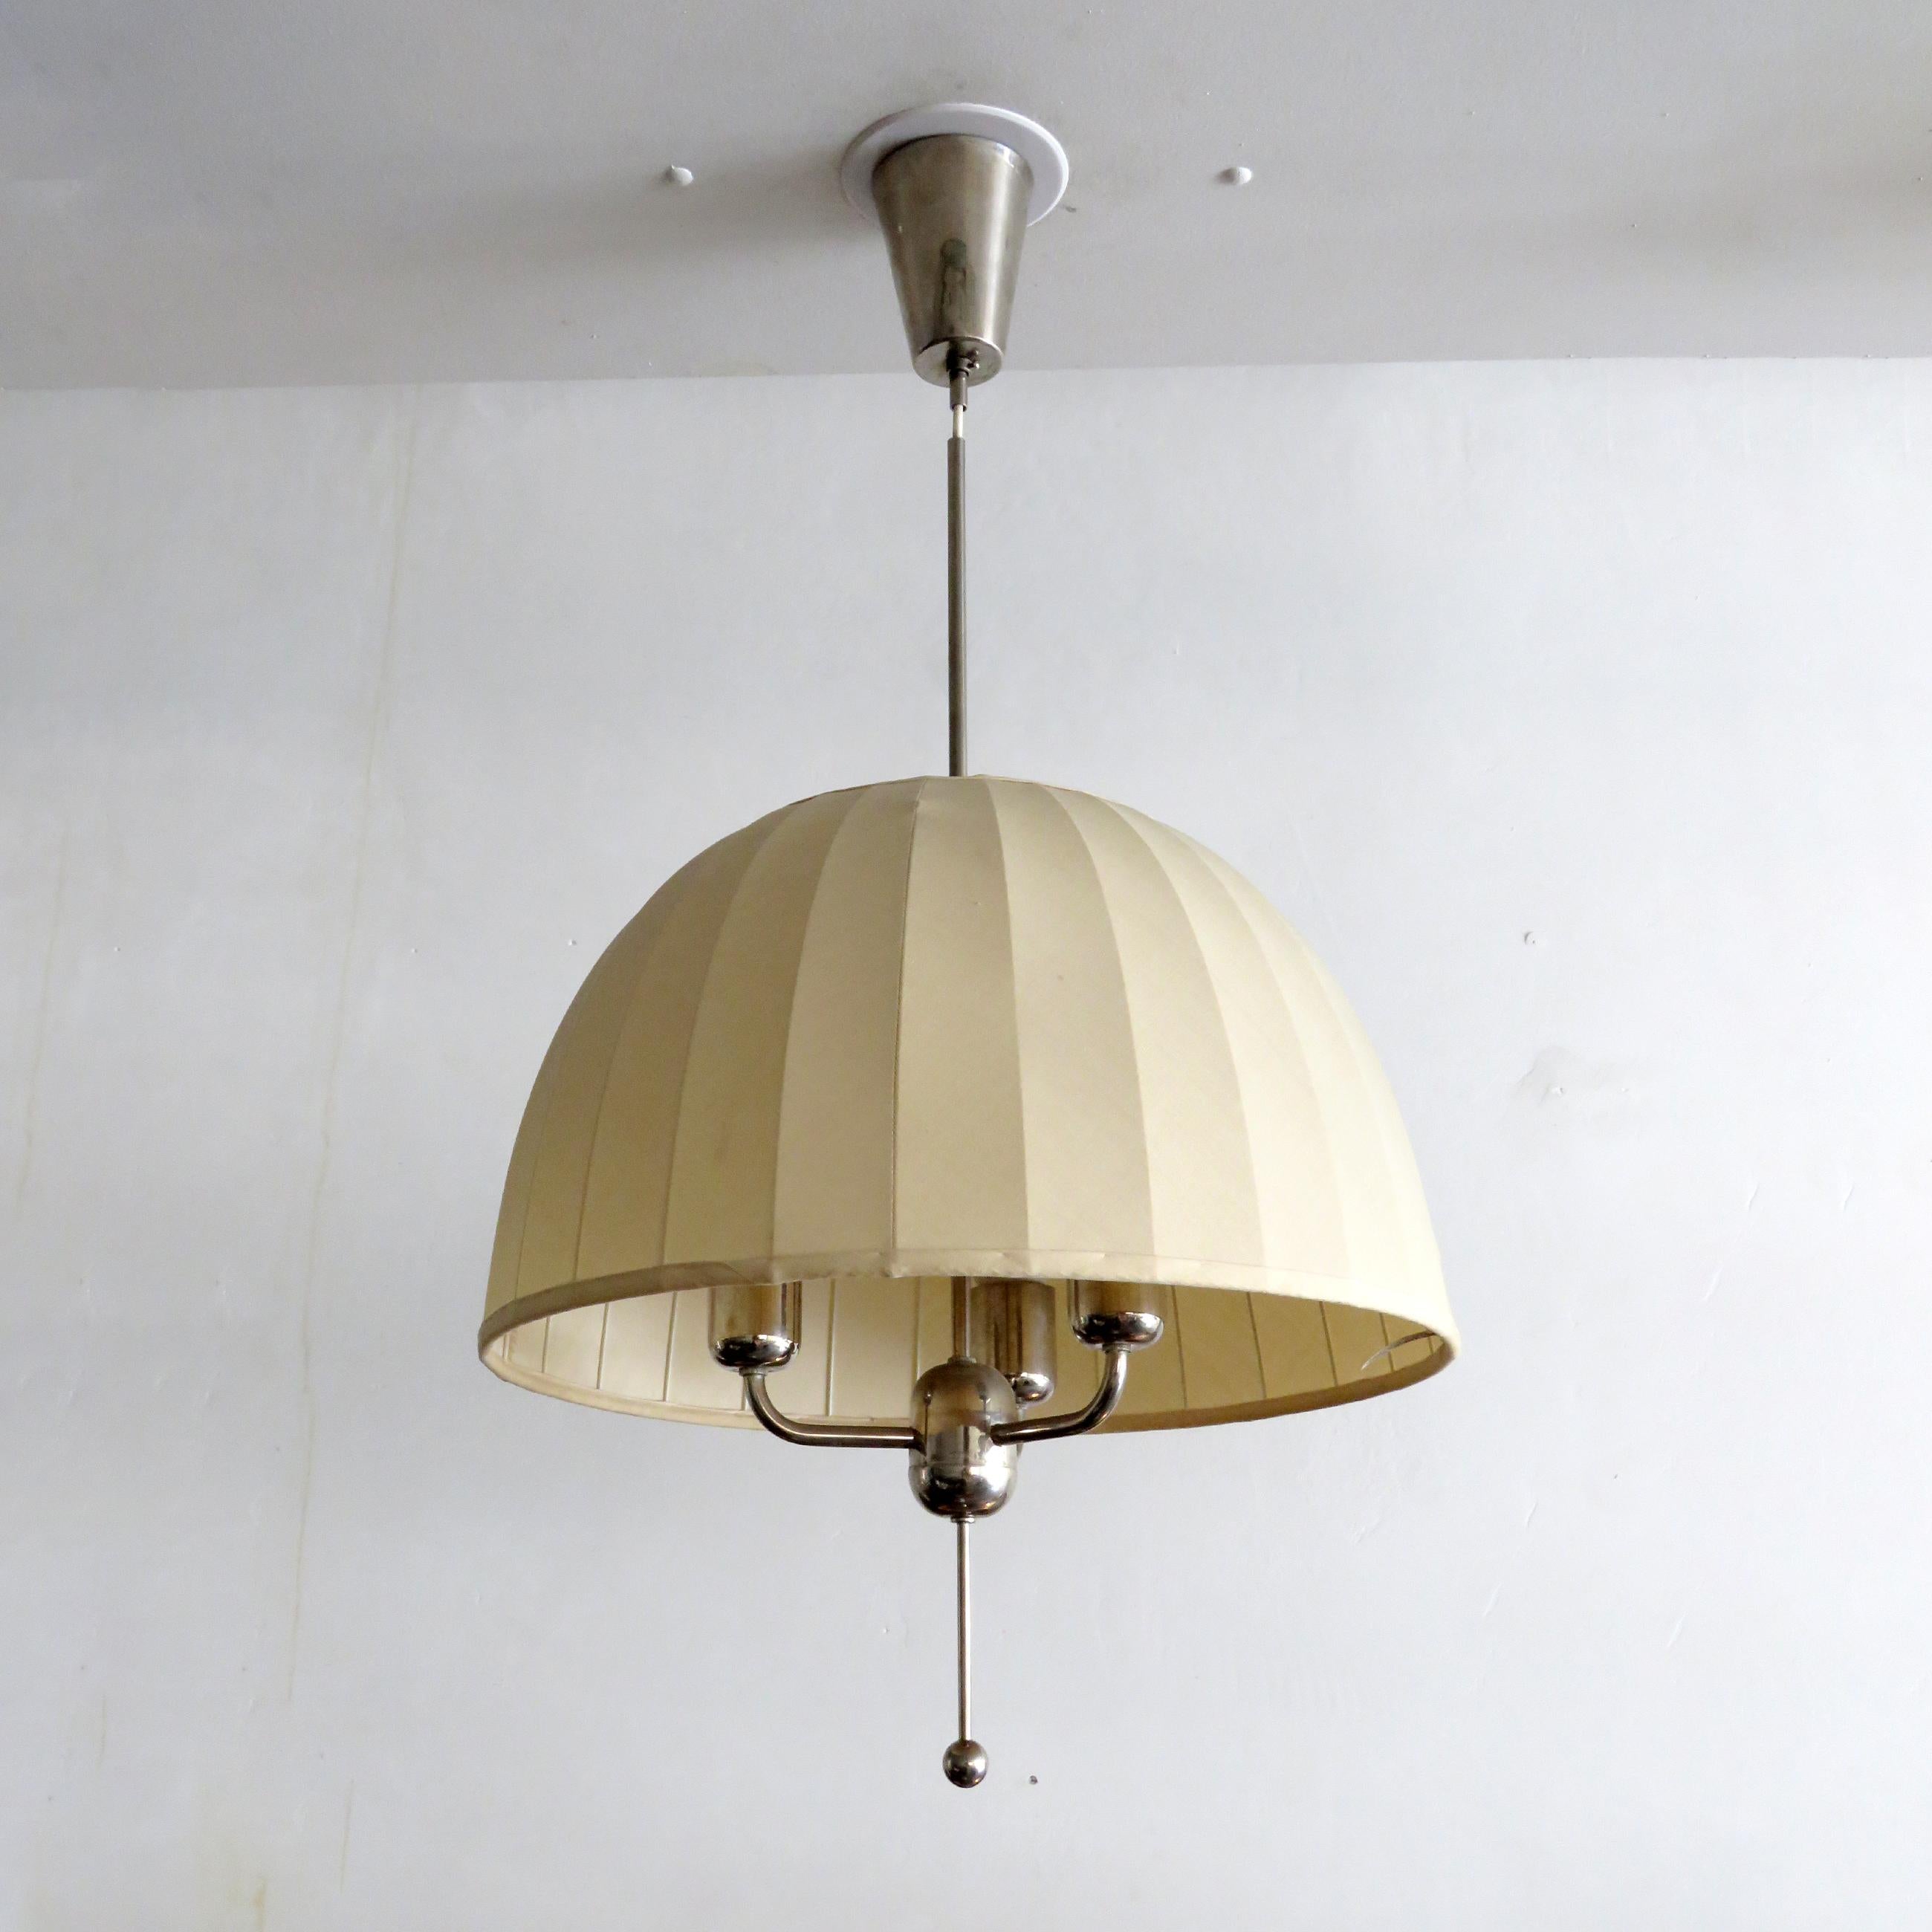 Wonderful pendant lamp 'Carolin' model T549/3 designed by Hans-Agne Jakobsson for Markaryd, Sweden, 1960, with nickel plated brass frame covered by a fabric shade, with original canopy. The overall drop as well as the vertical position of the shade